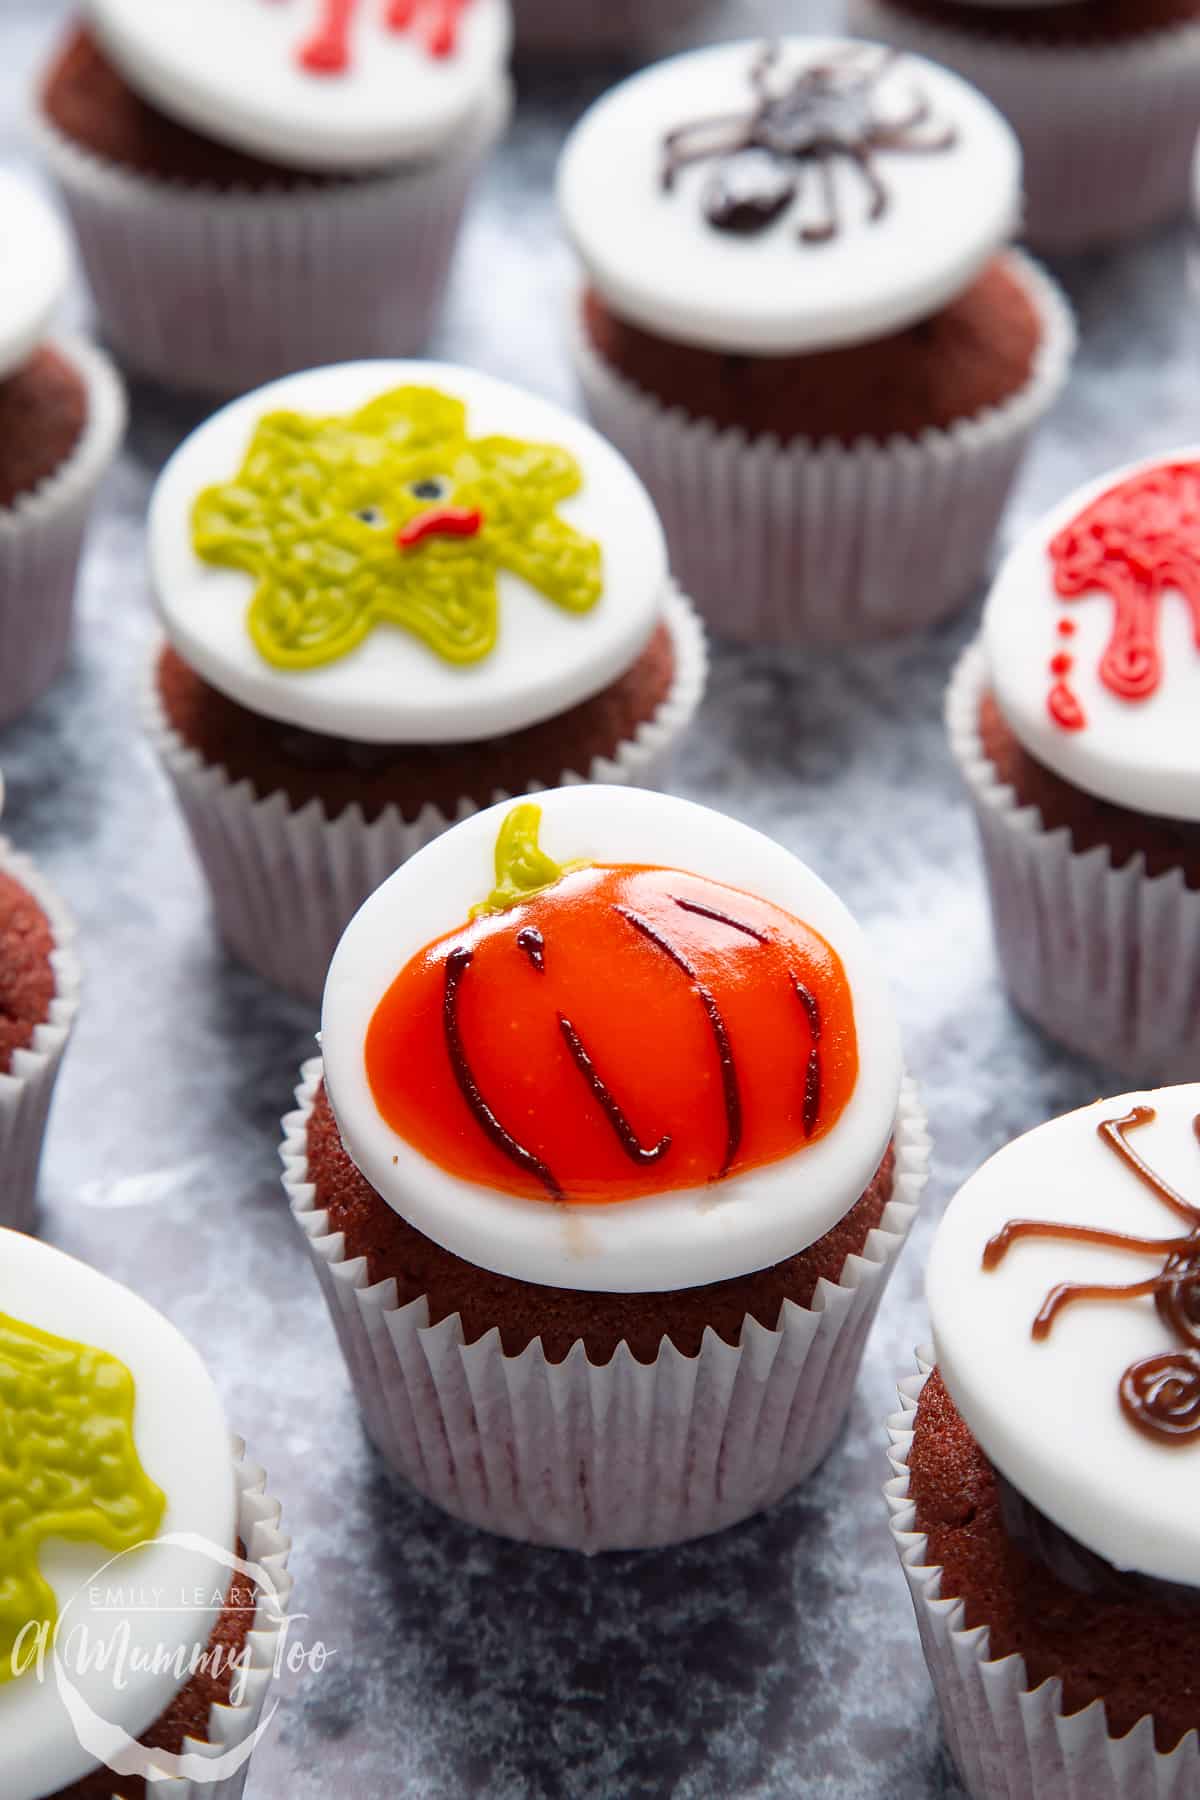 Dairy free Halloween cupcakes: red velvet cupcakes topped with chocolate frosting and white fondant discs decorated with icing pens. The cupcake in the foreground has a pumpkin design.